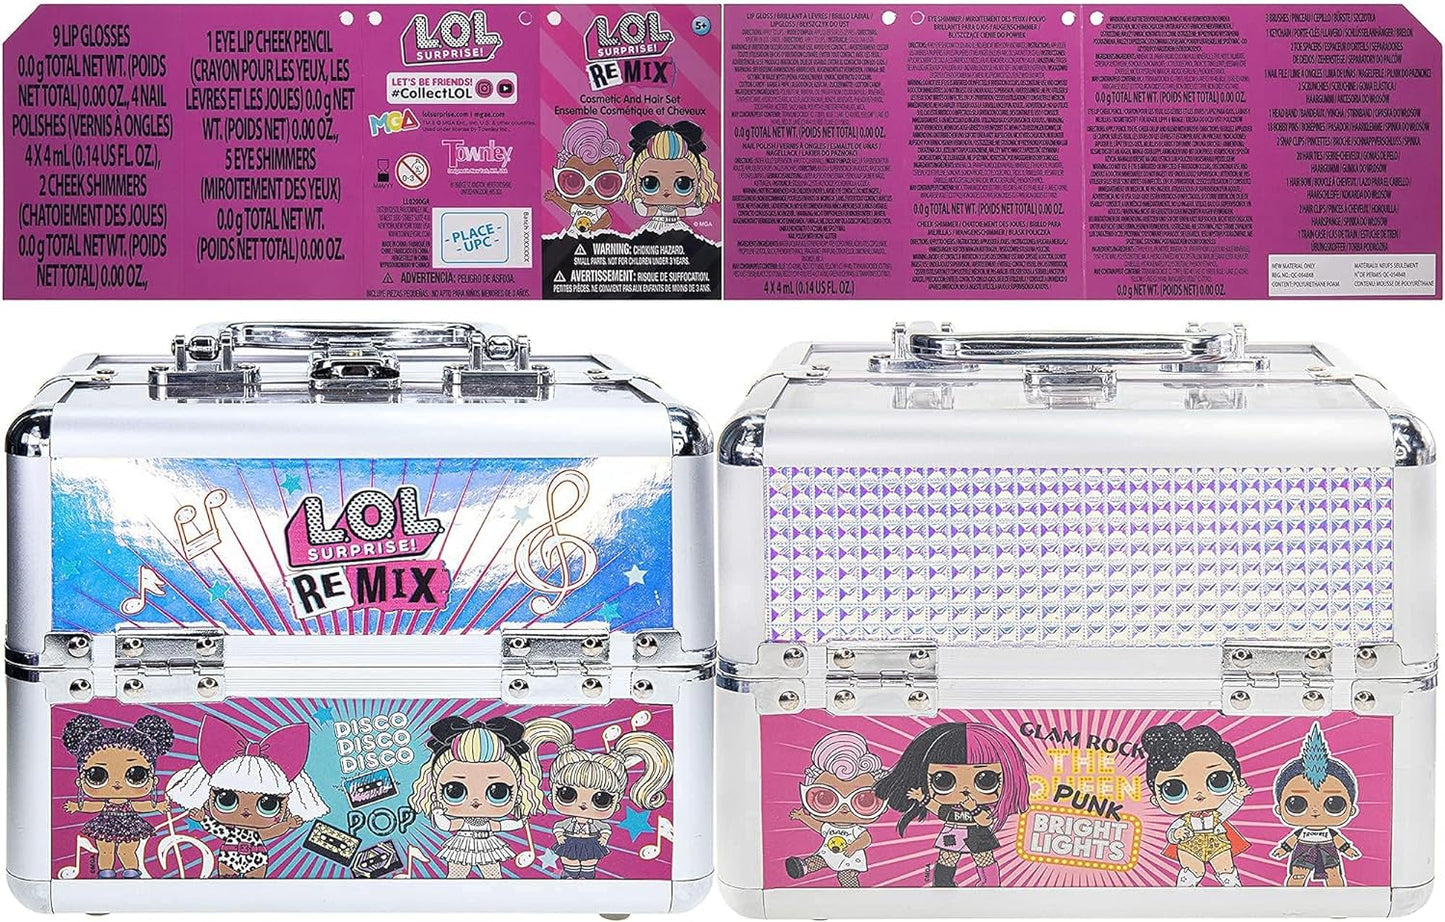 Townley Girl Lol Surprise - Cosmetic Case Set